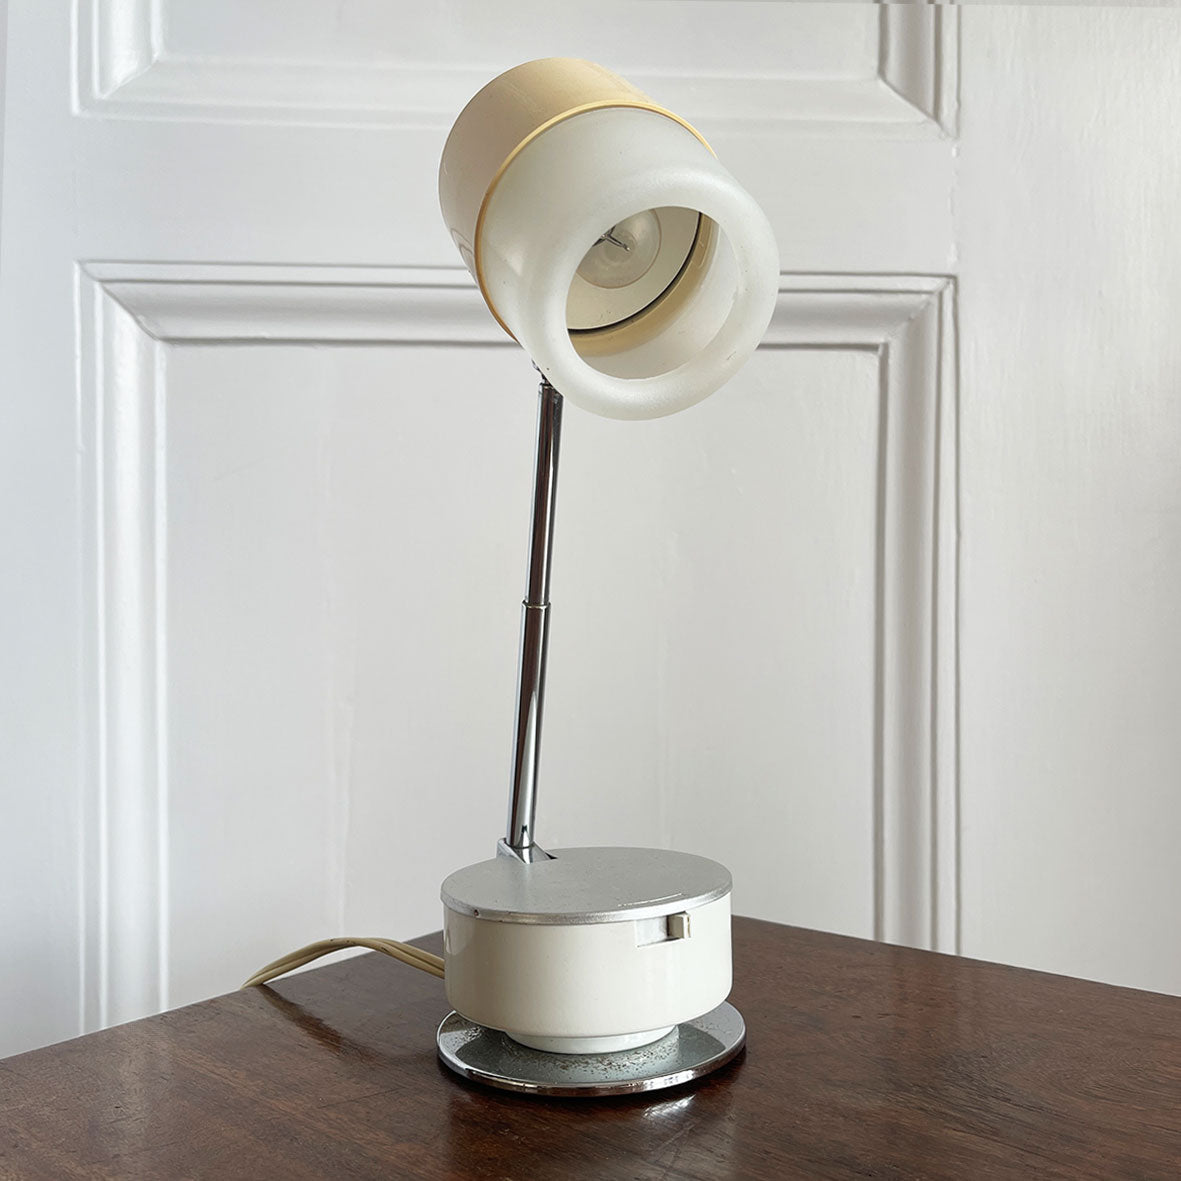 A slick looking 1960s Japanese Lloyd's compact Telescopic Desk Lamp. A very versatile lamp that can be set in many positions. With two light intensities, it's Ideal for a cool desk or bedside table. Main On off switch on lead - SHOP NOW - www.intovintage.co.uk